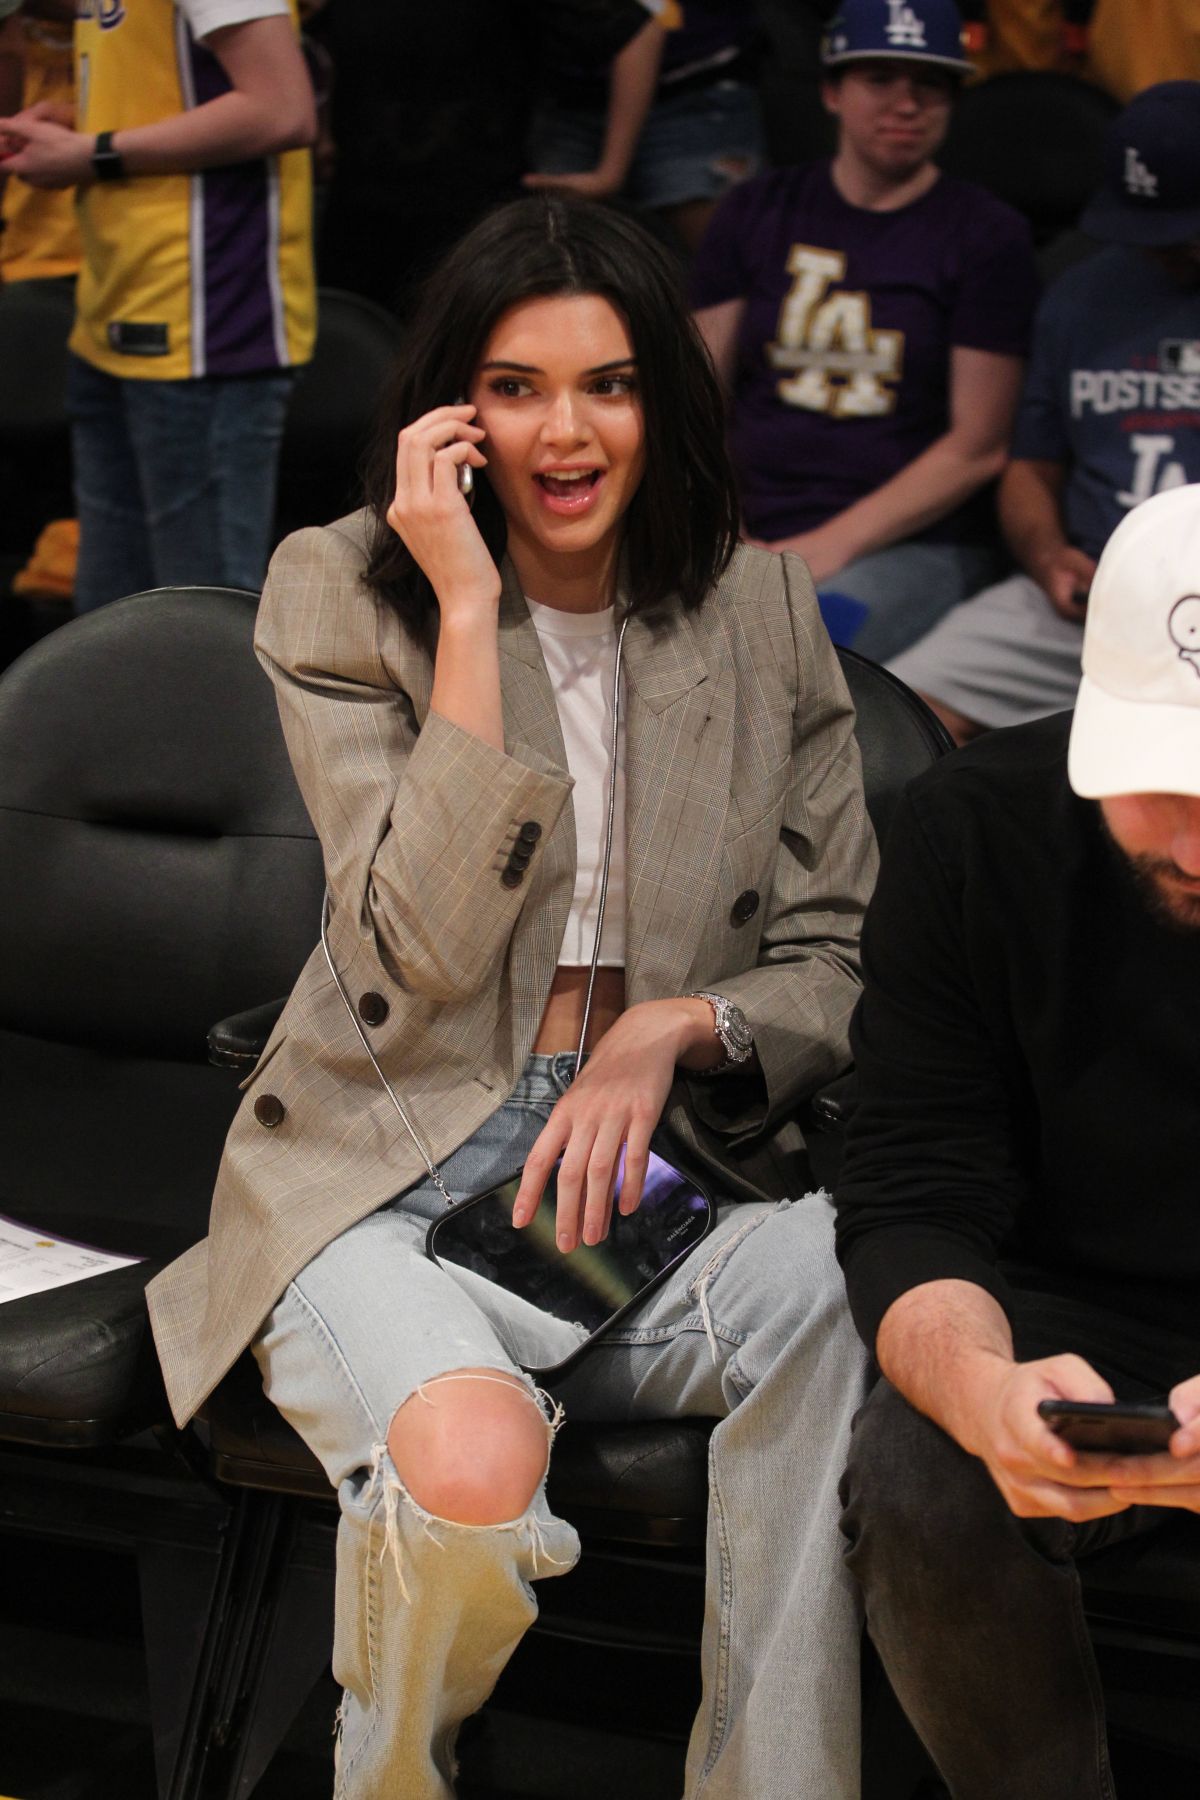 KENDALL JENNER at Lakers Game in Los Angeles 01/19/2017 - HawtCelebs